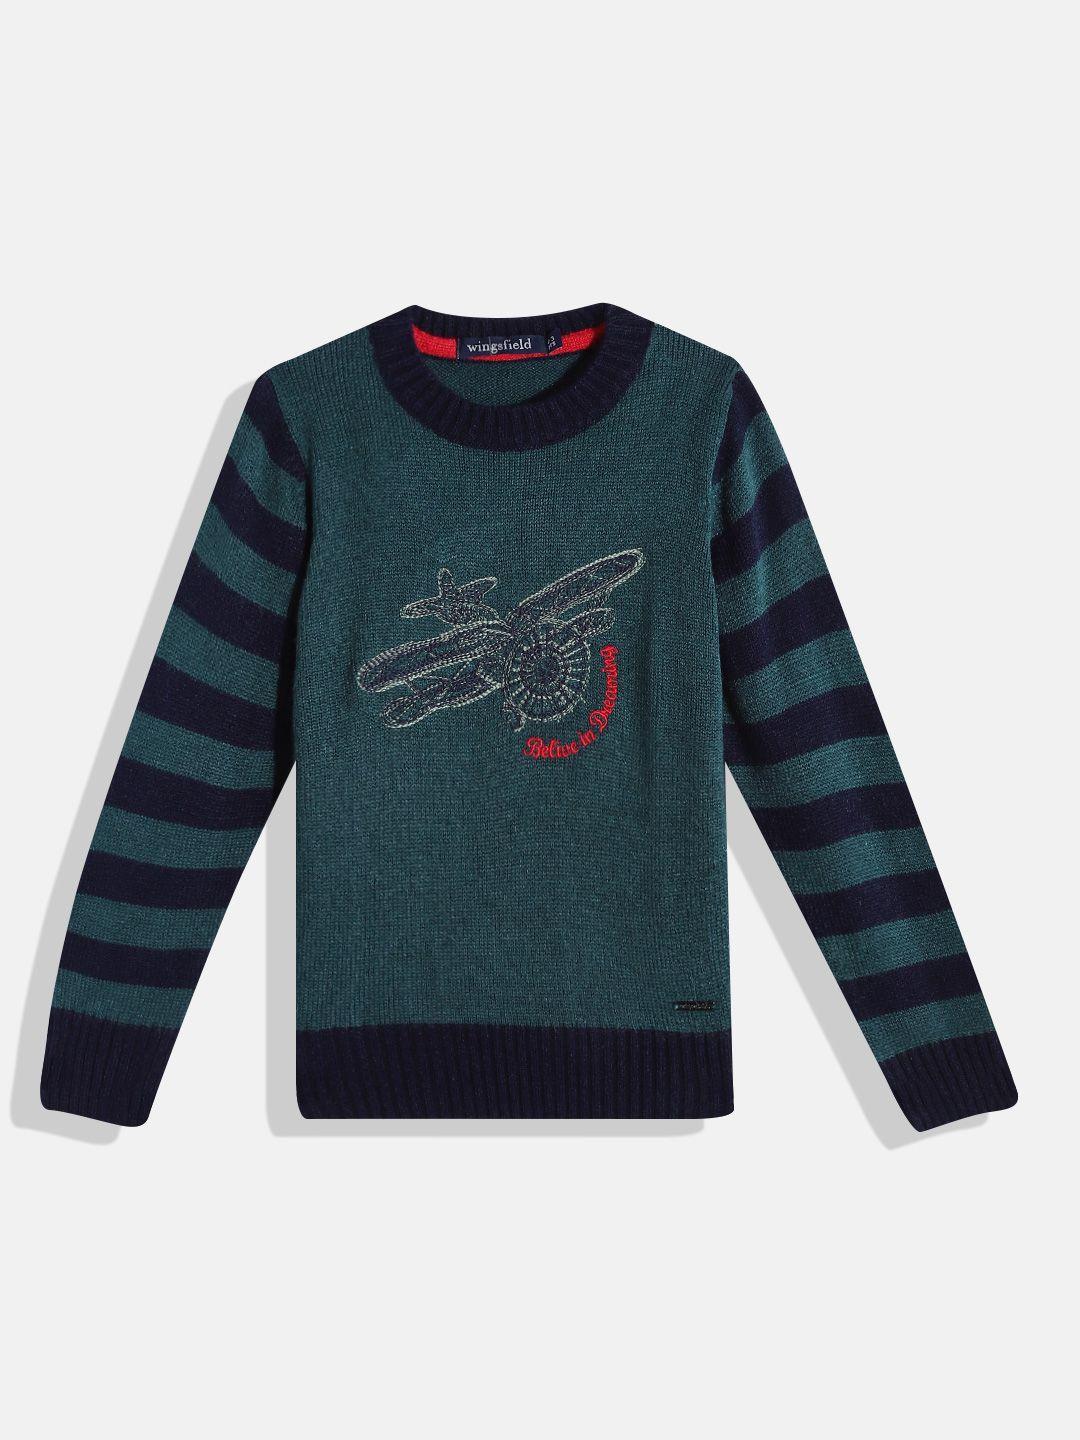 wingsfield-boys-green-graphic-printed-pullover